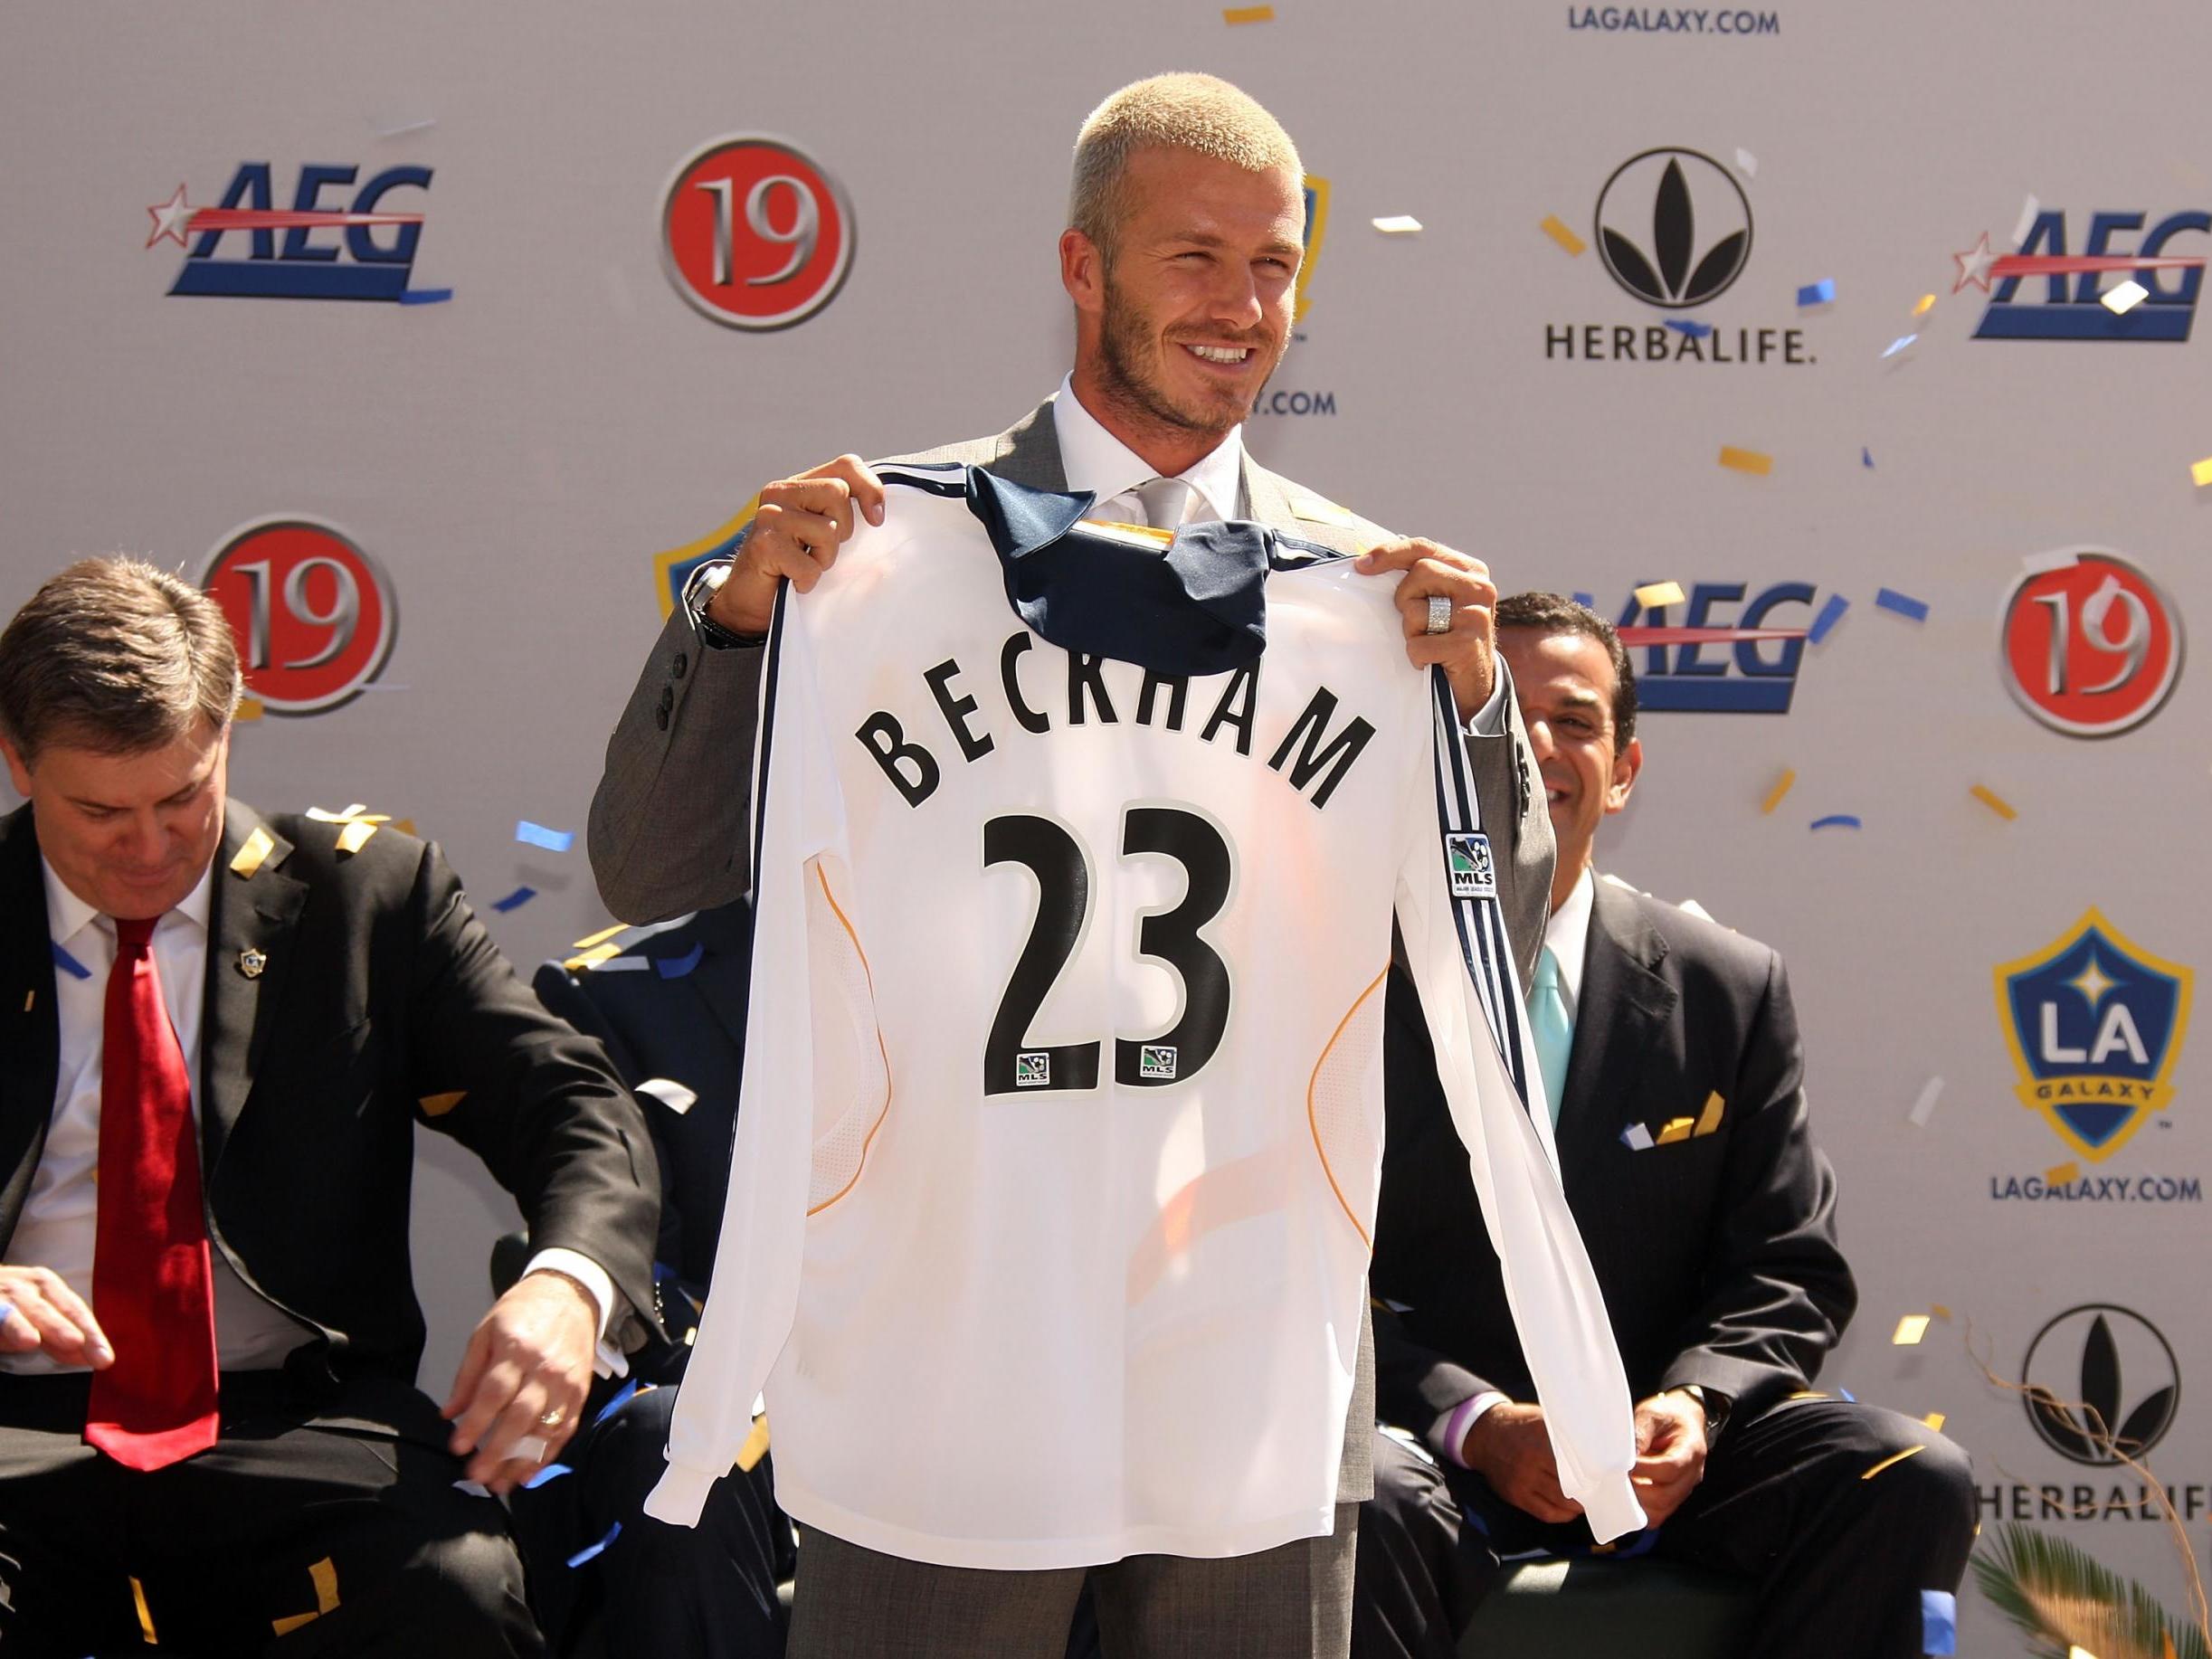 Beckham will be honoured by the Galaxy